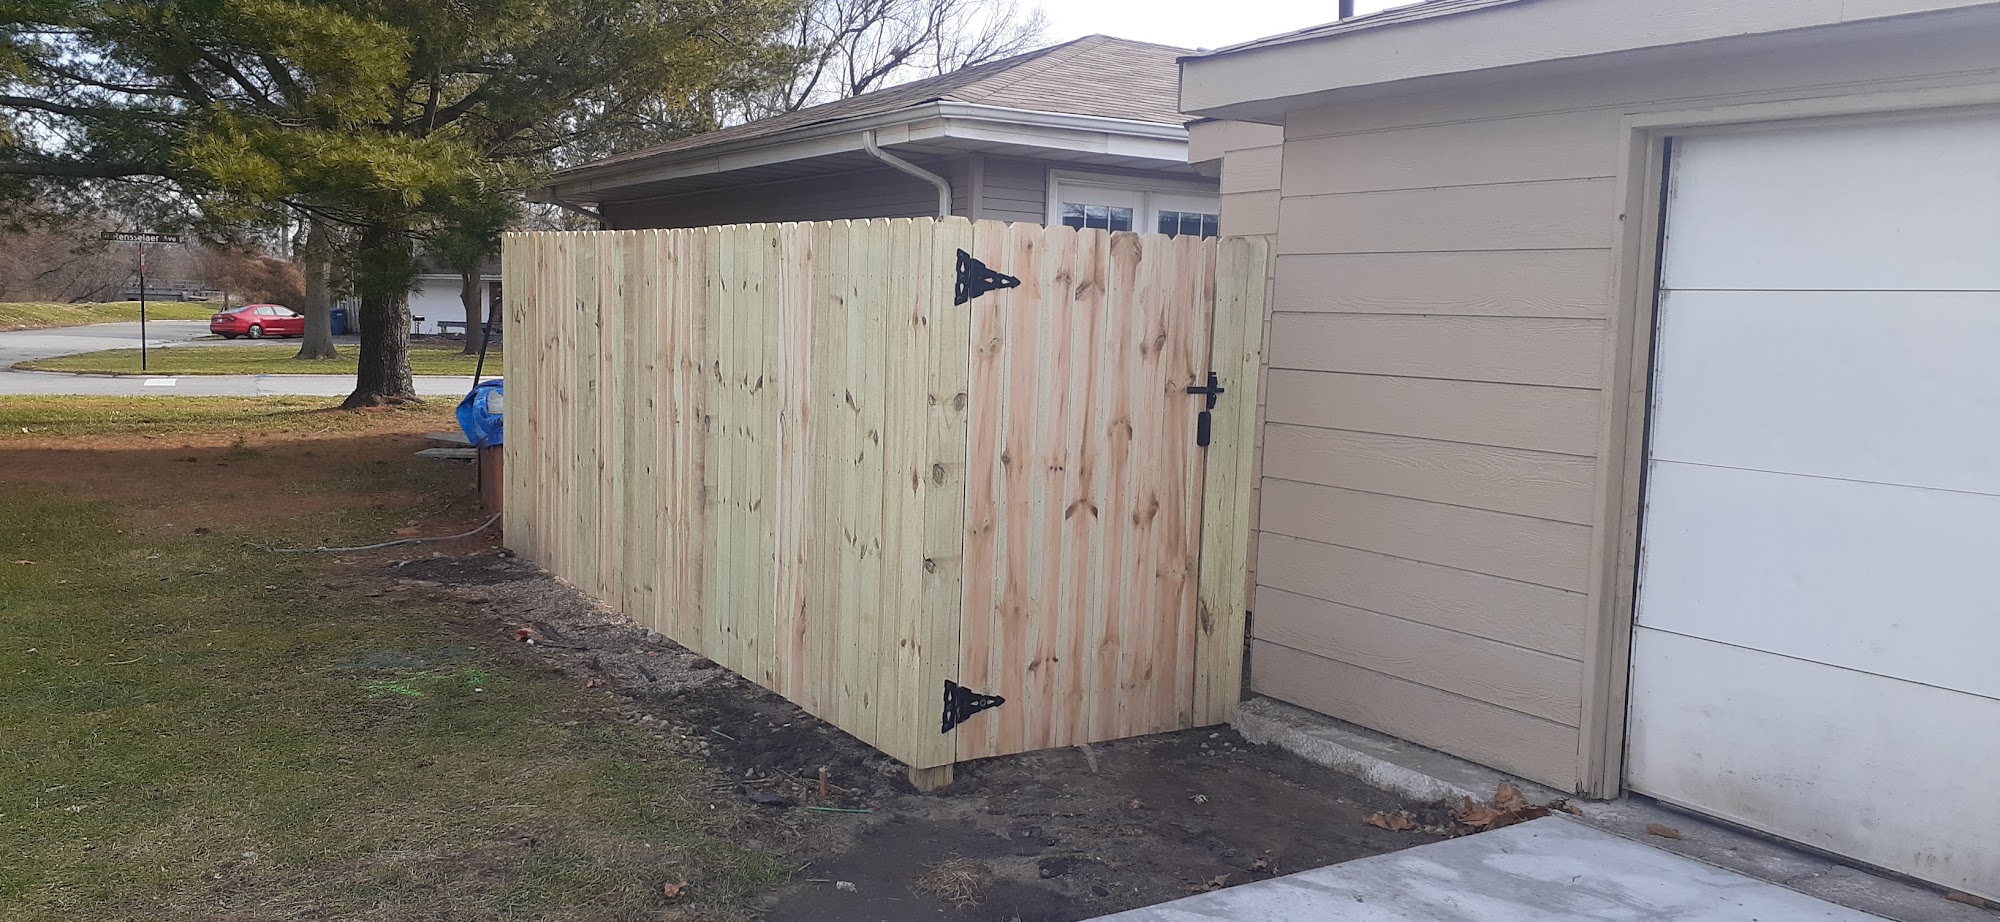 Rojas fencing and decking 121 E Ave C, Griffith Indiana 46319